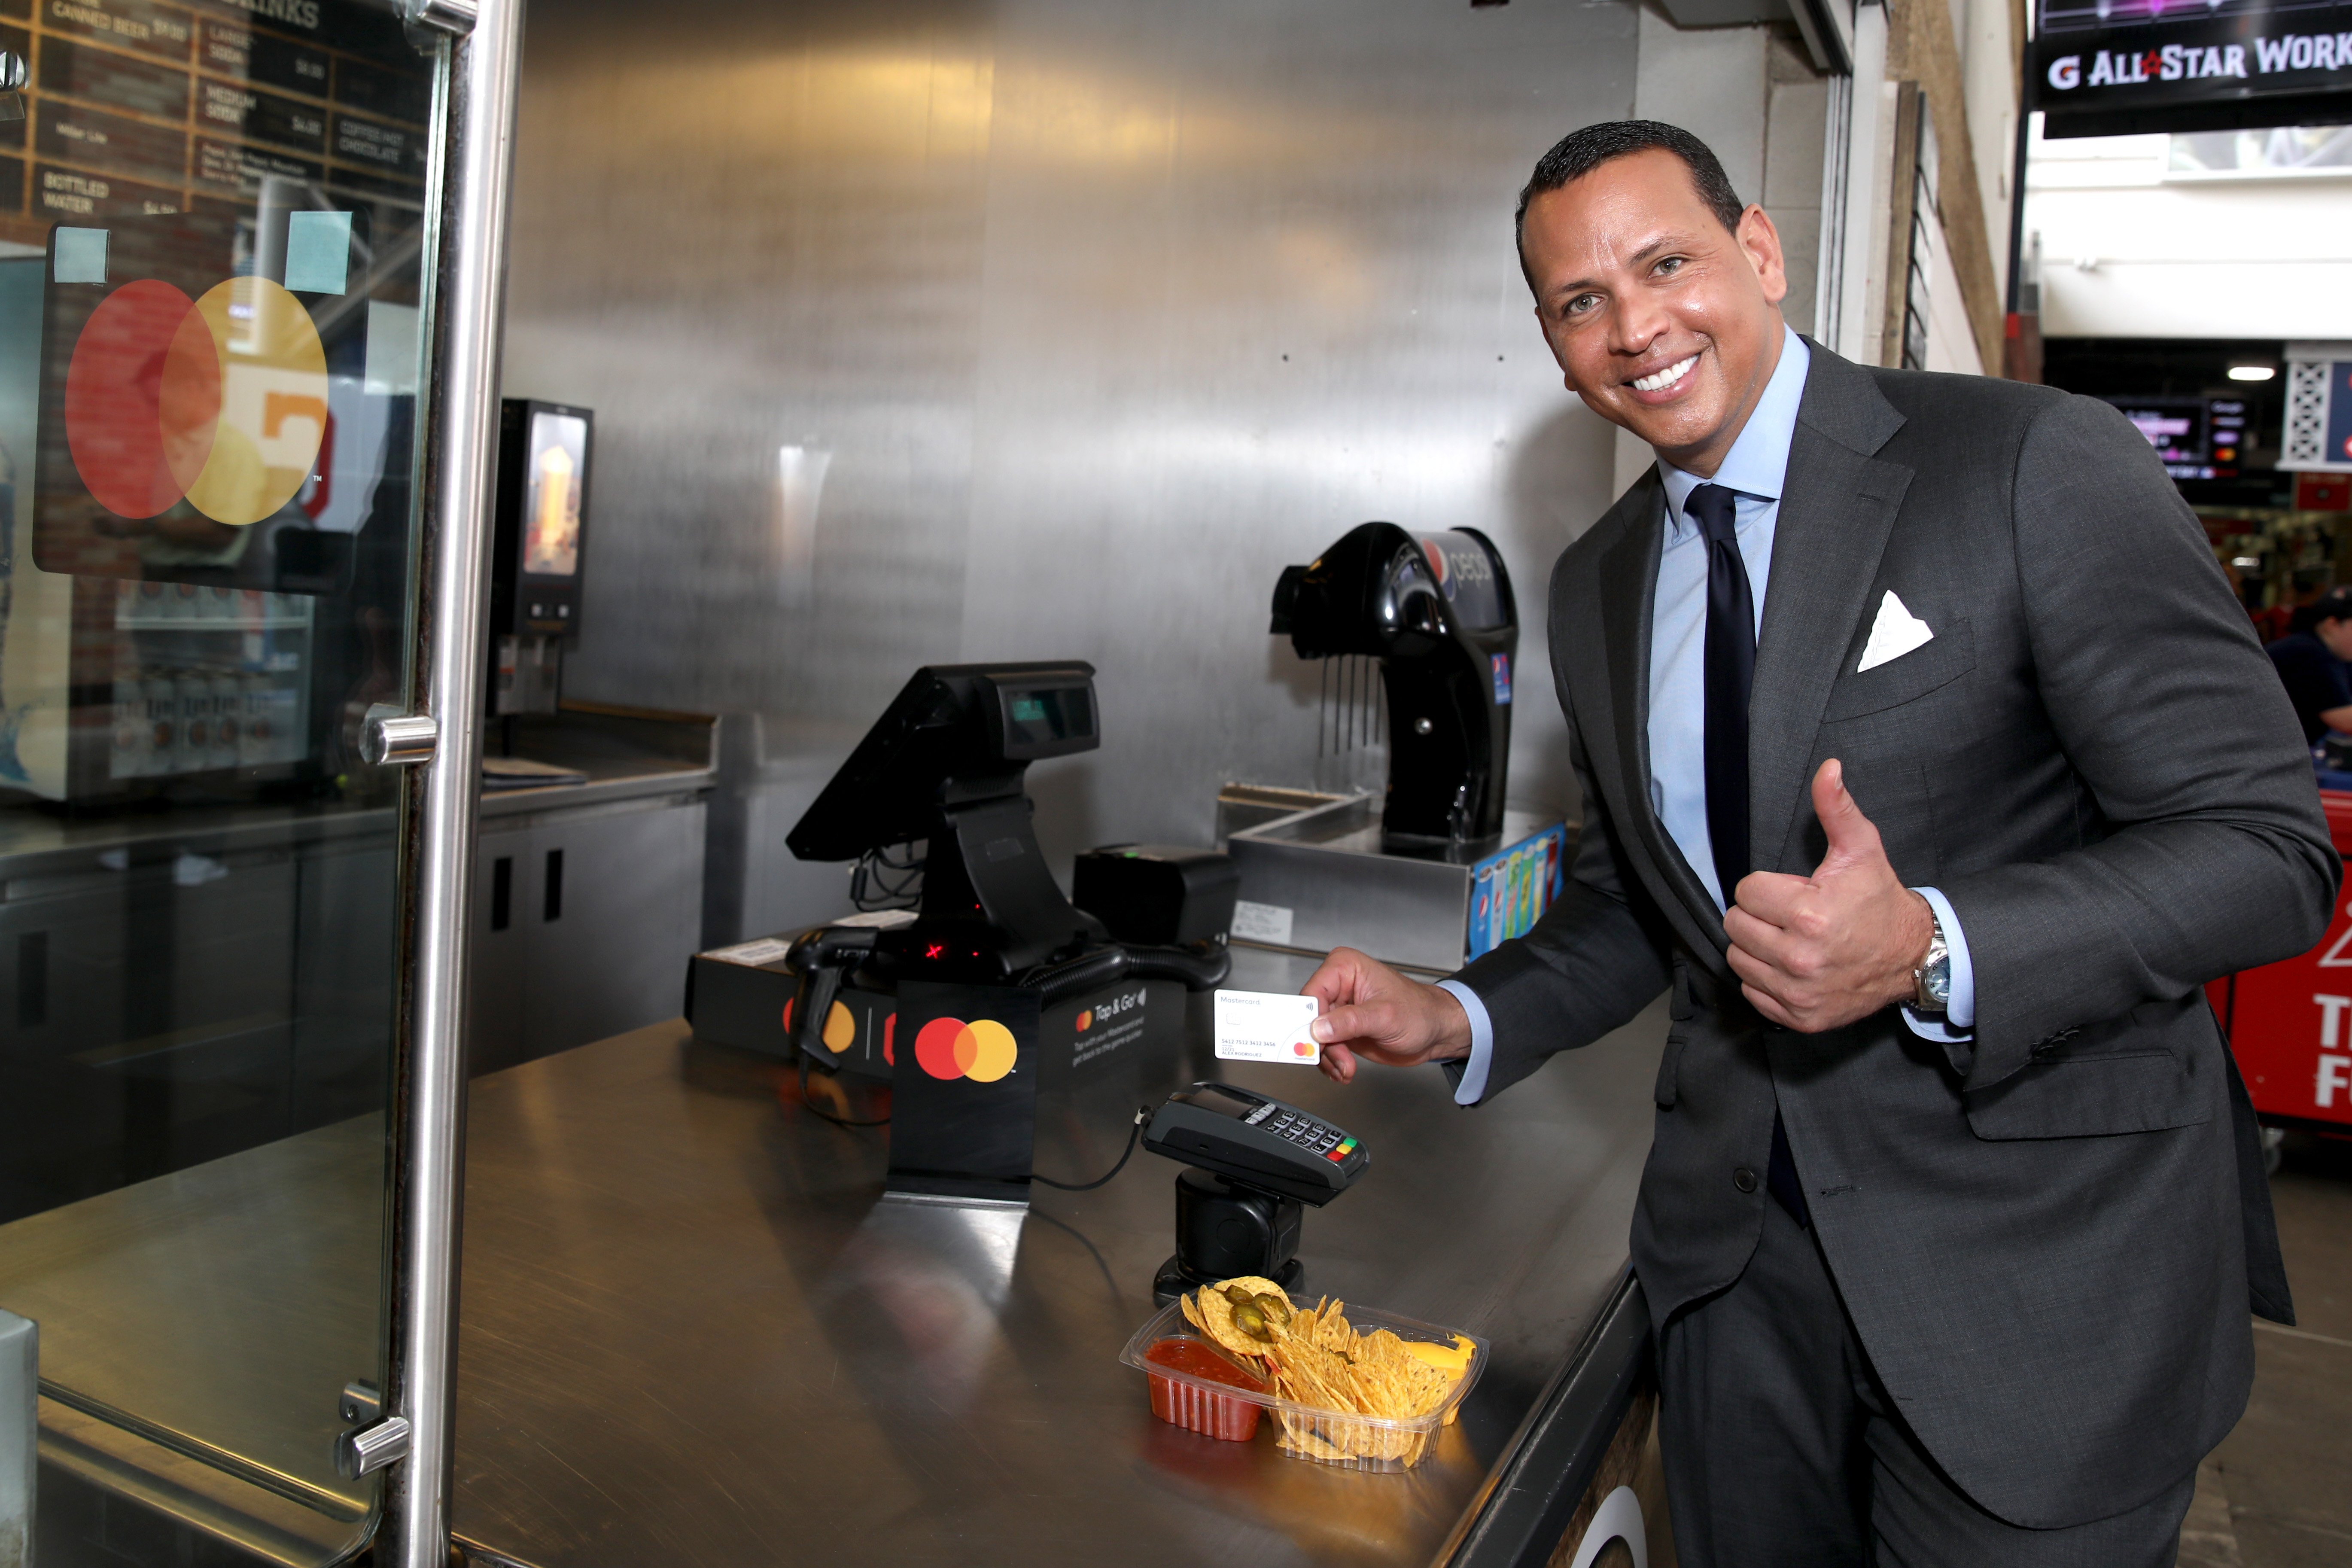 During All-Star Week, Alex Rodriguez is making some time to Start Something Priceless and hoping others will too. Dine out with family and friends this summer and use your Mastercard and you’ll help support Stand Up To Cancer. - July 8th 2019 in Cleveland, OH